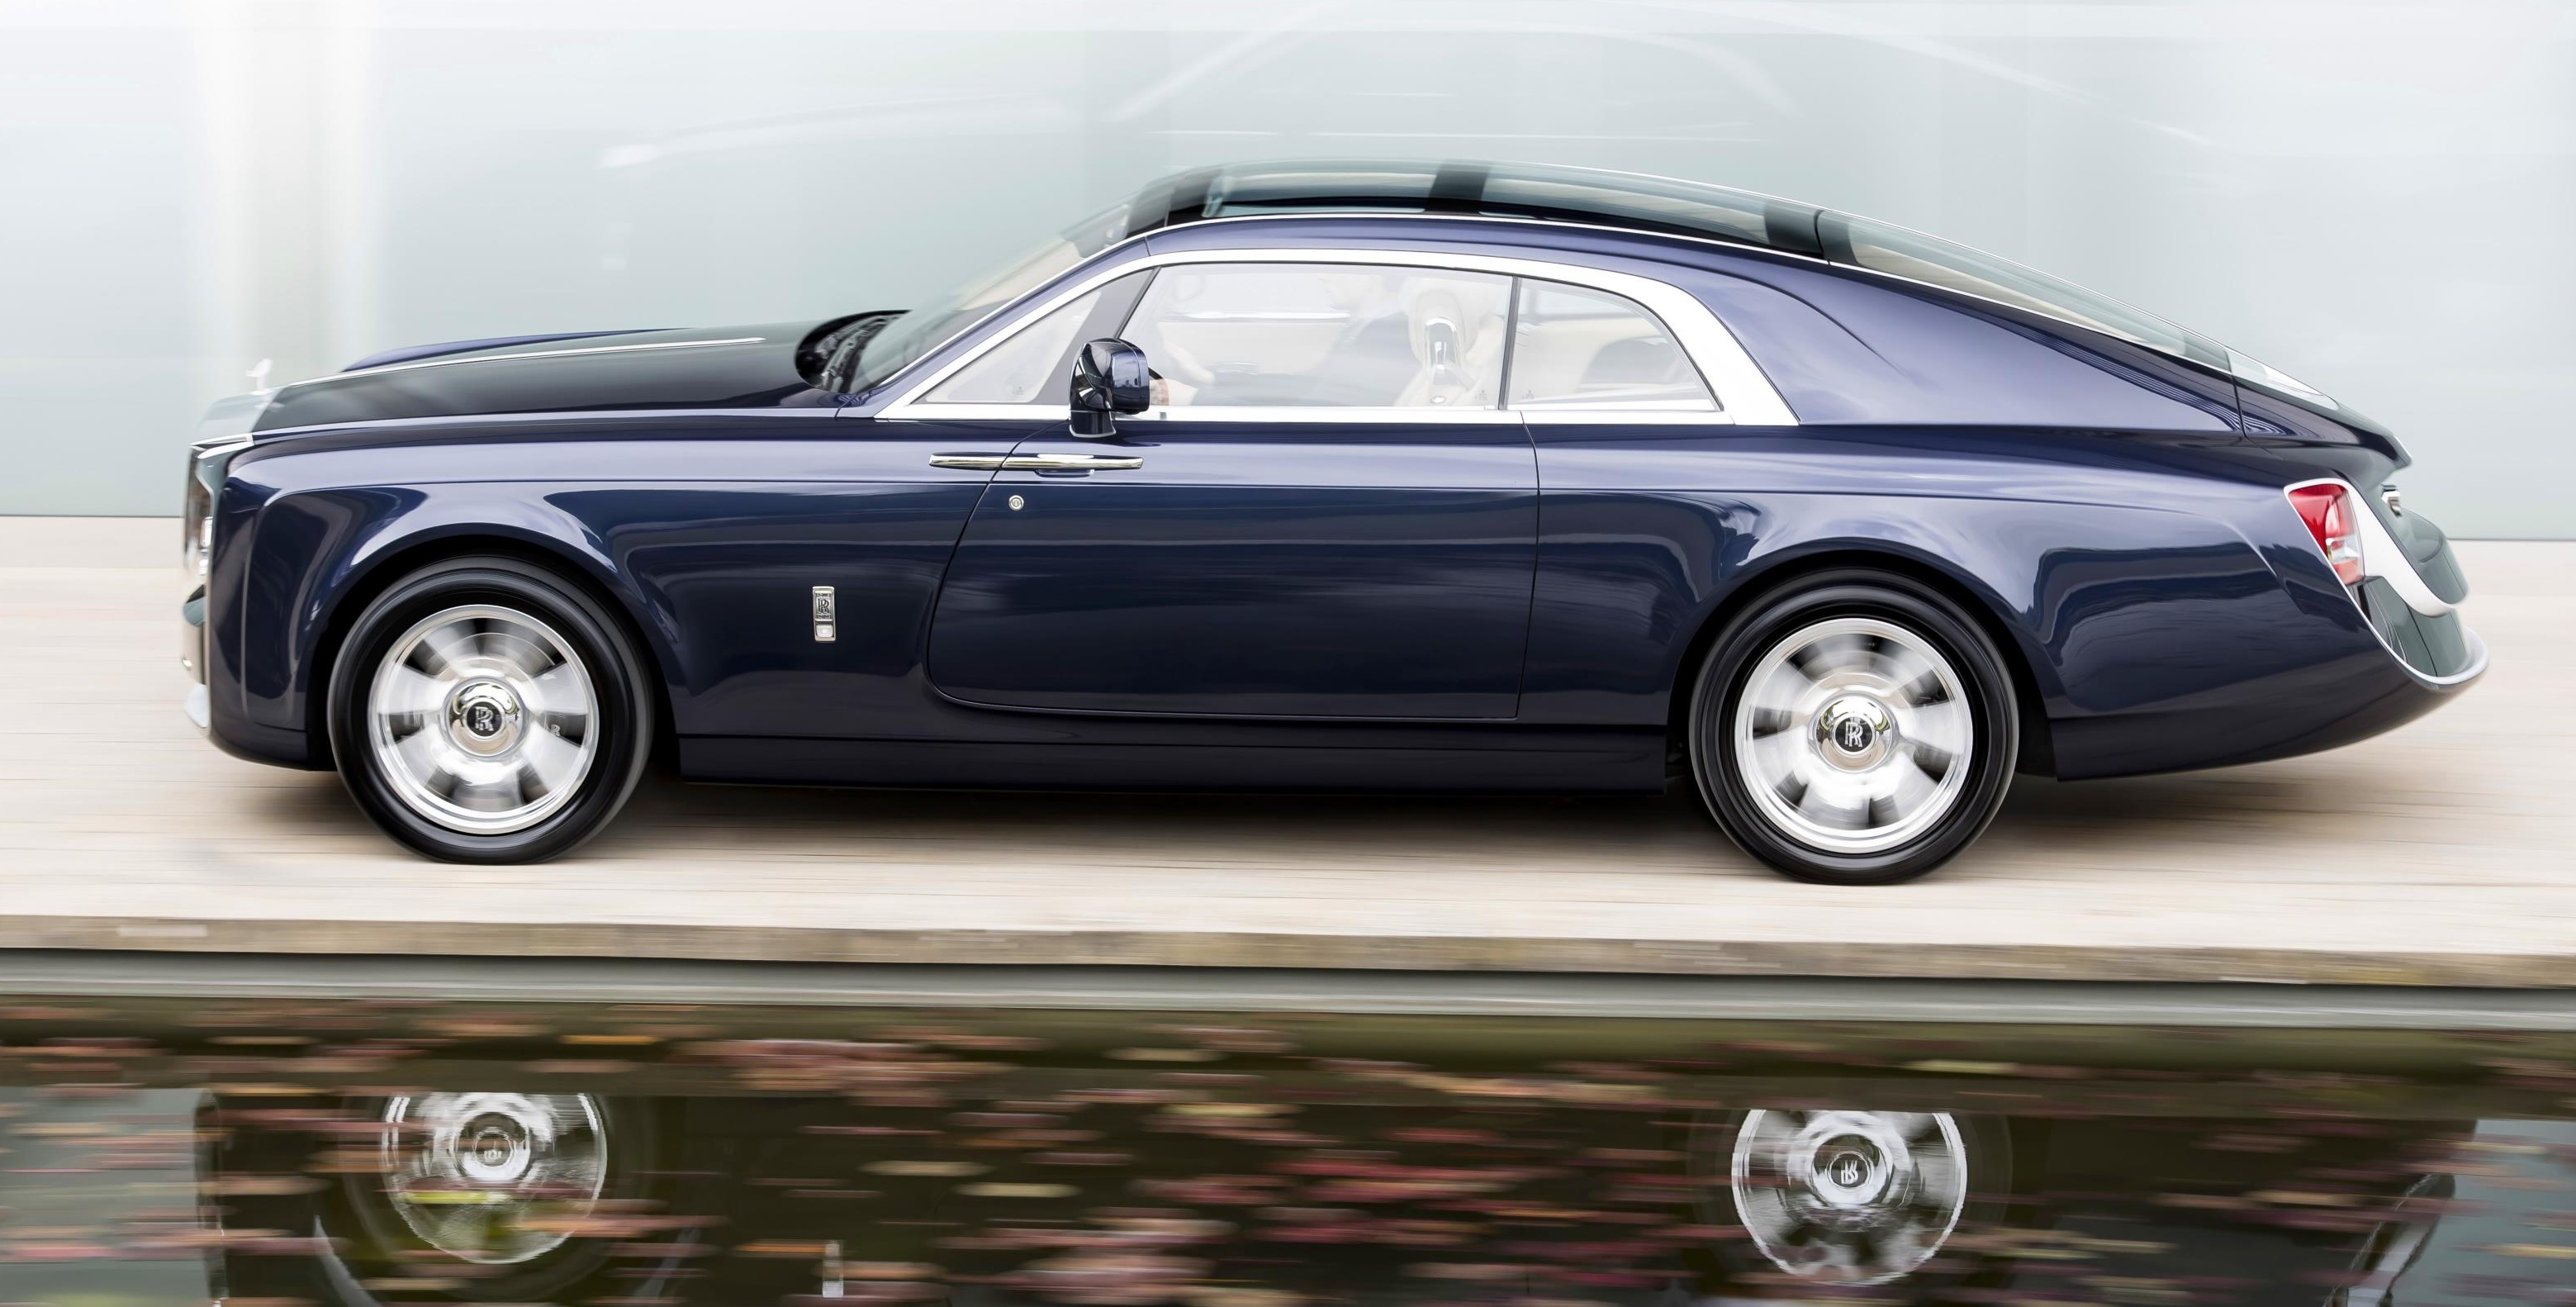 RollsRoyce drives up car luxury with Boat Tail